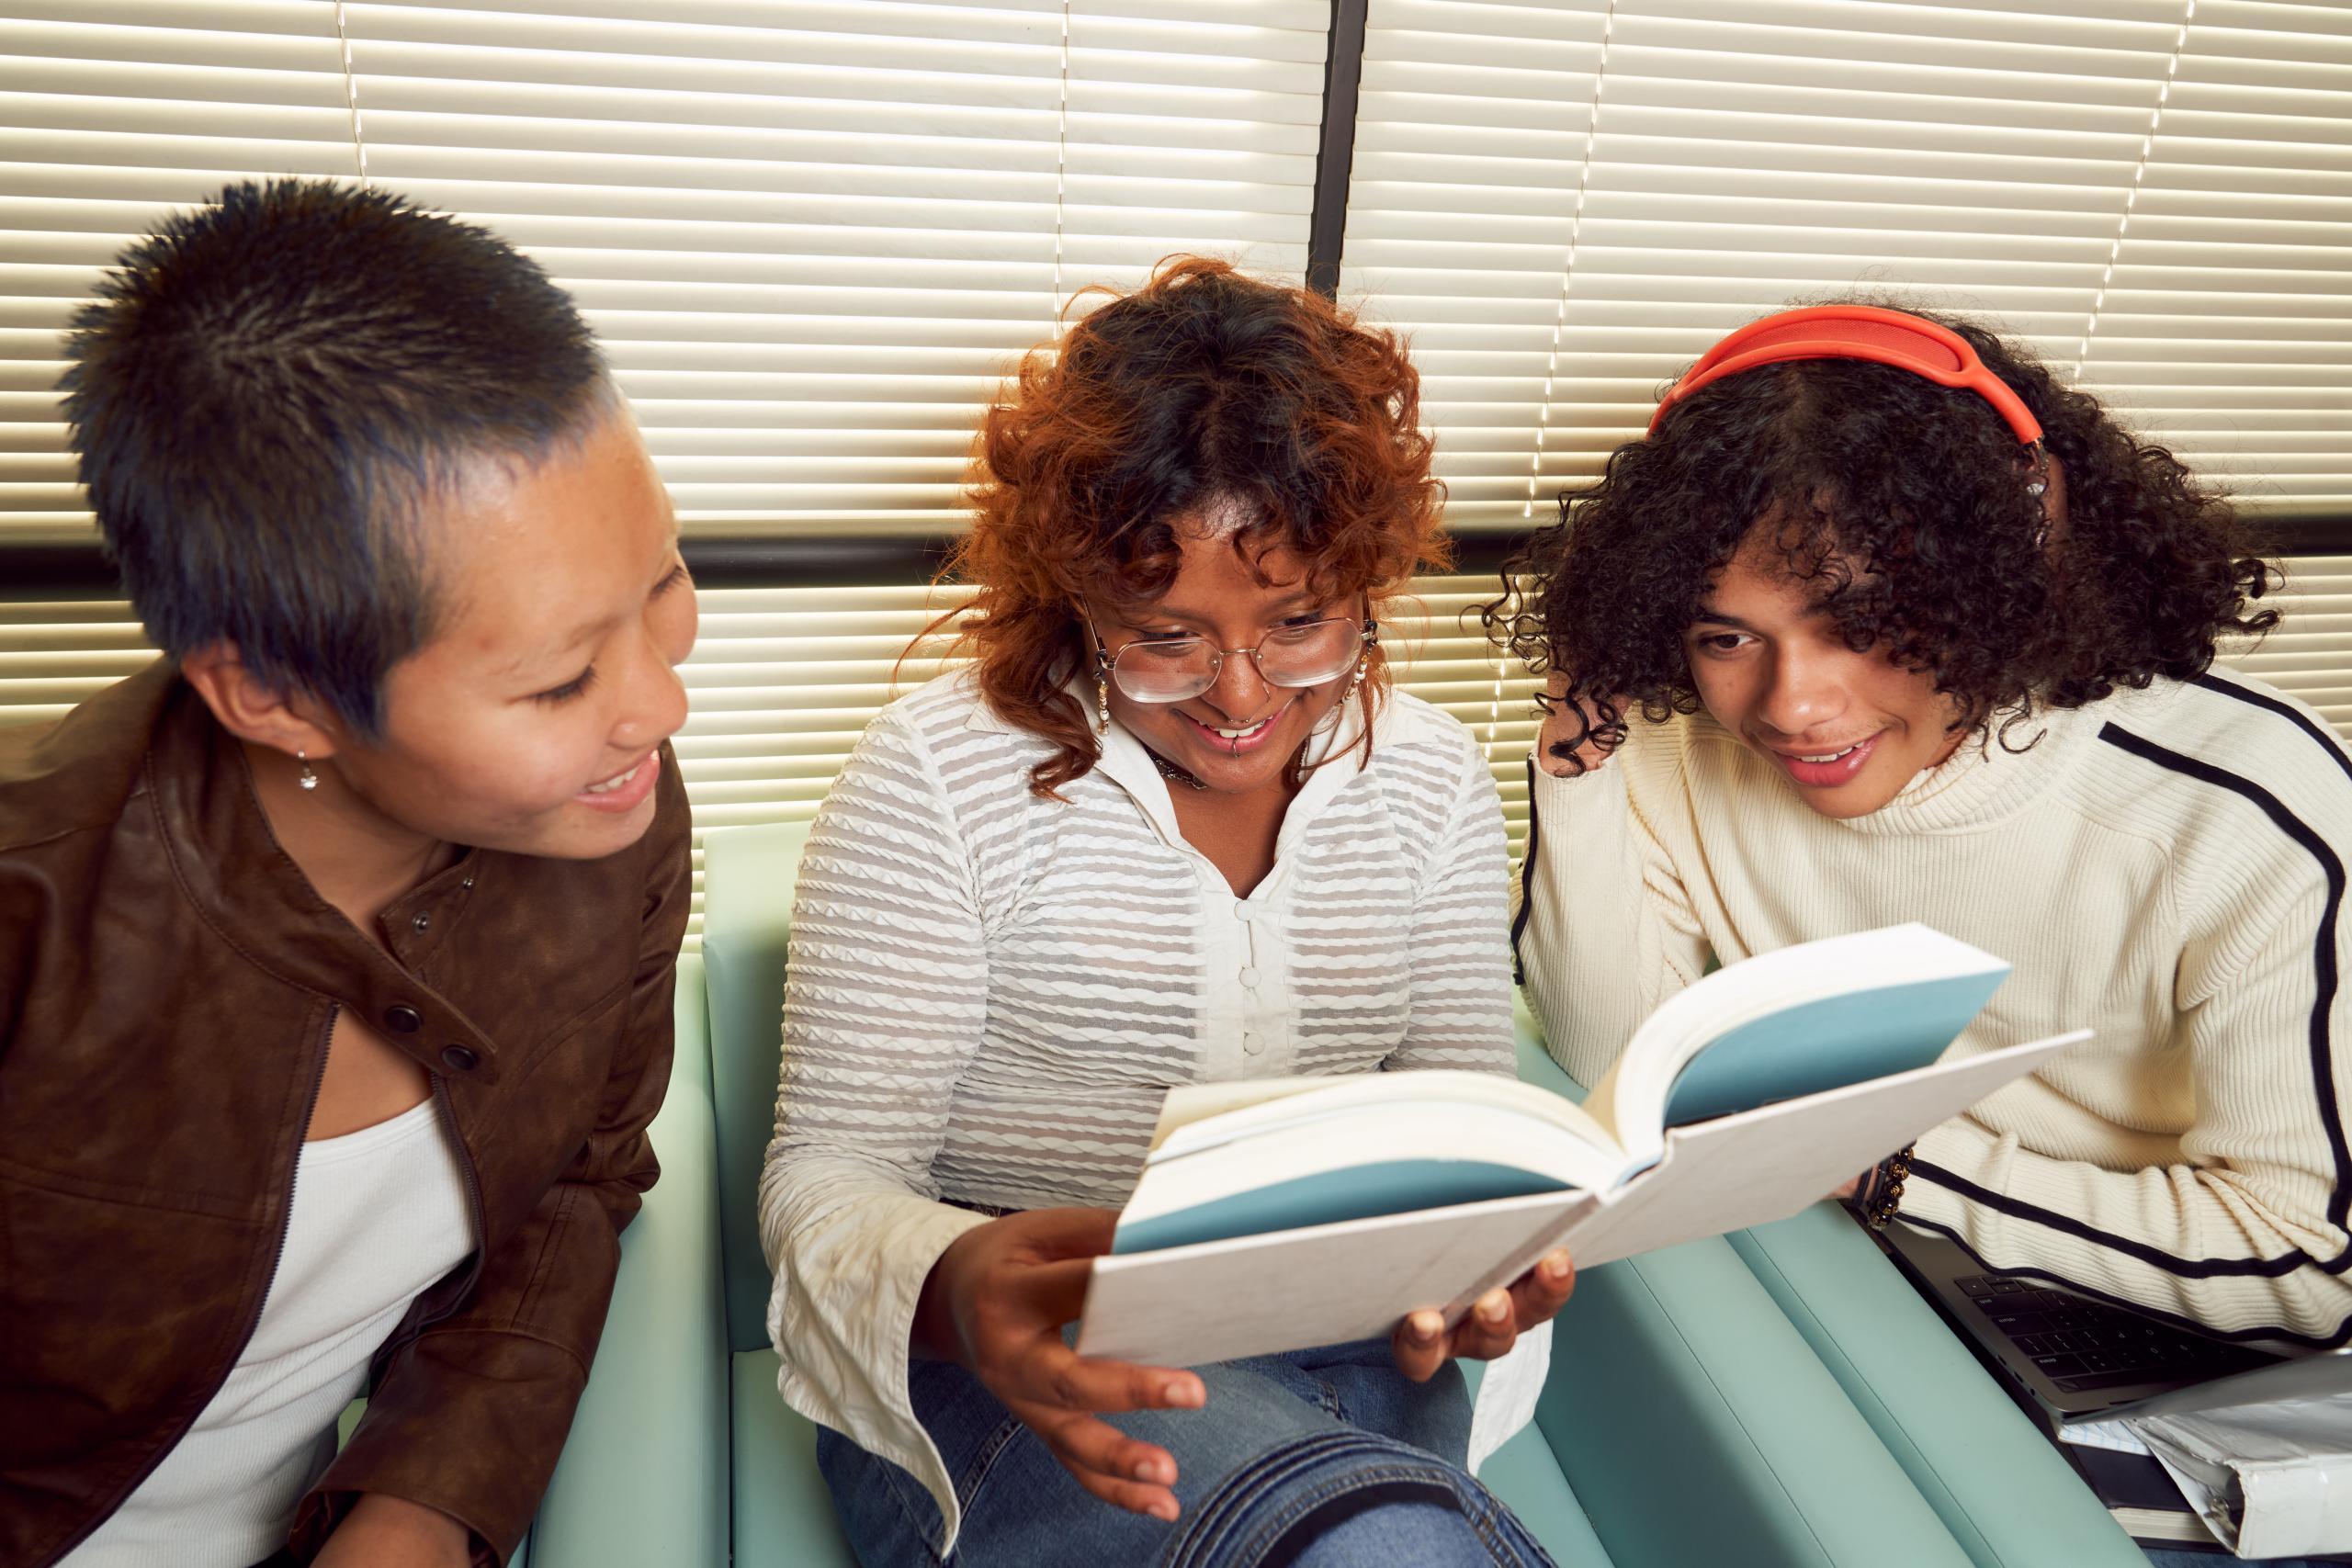 Three girls of different ethnicities sitting together and looking at the same book in the middle